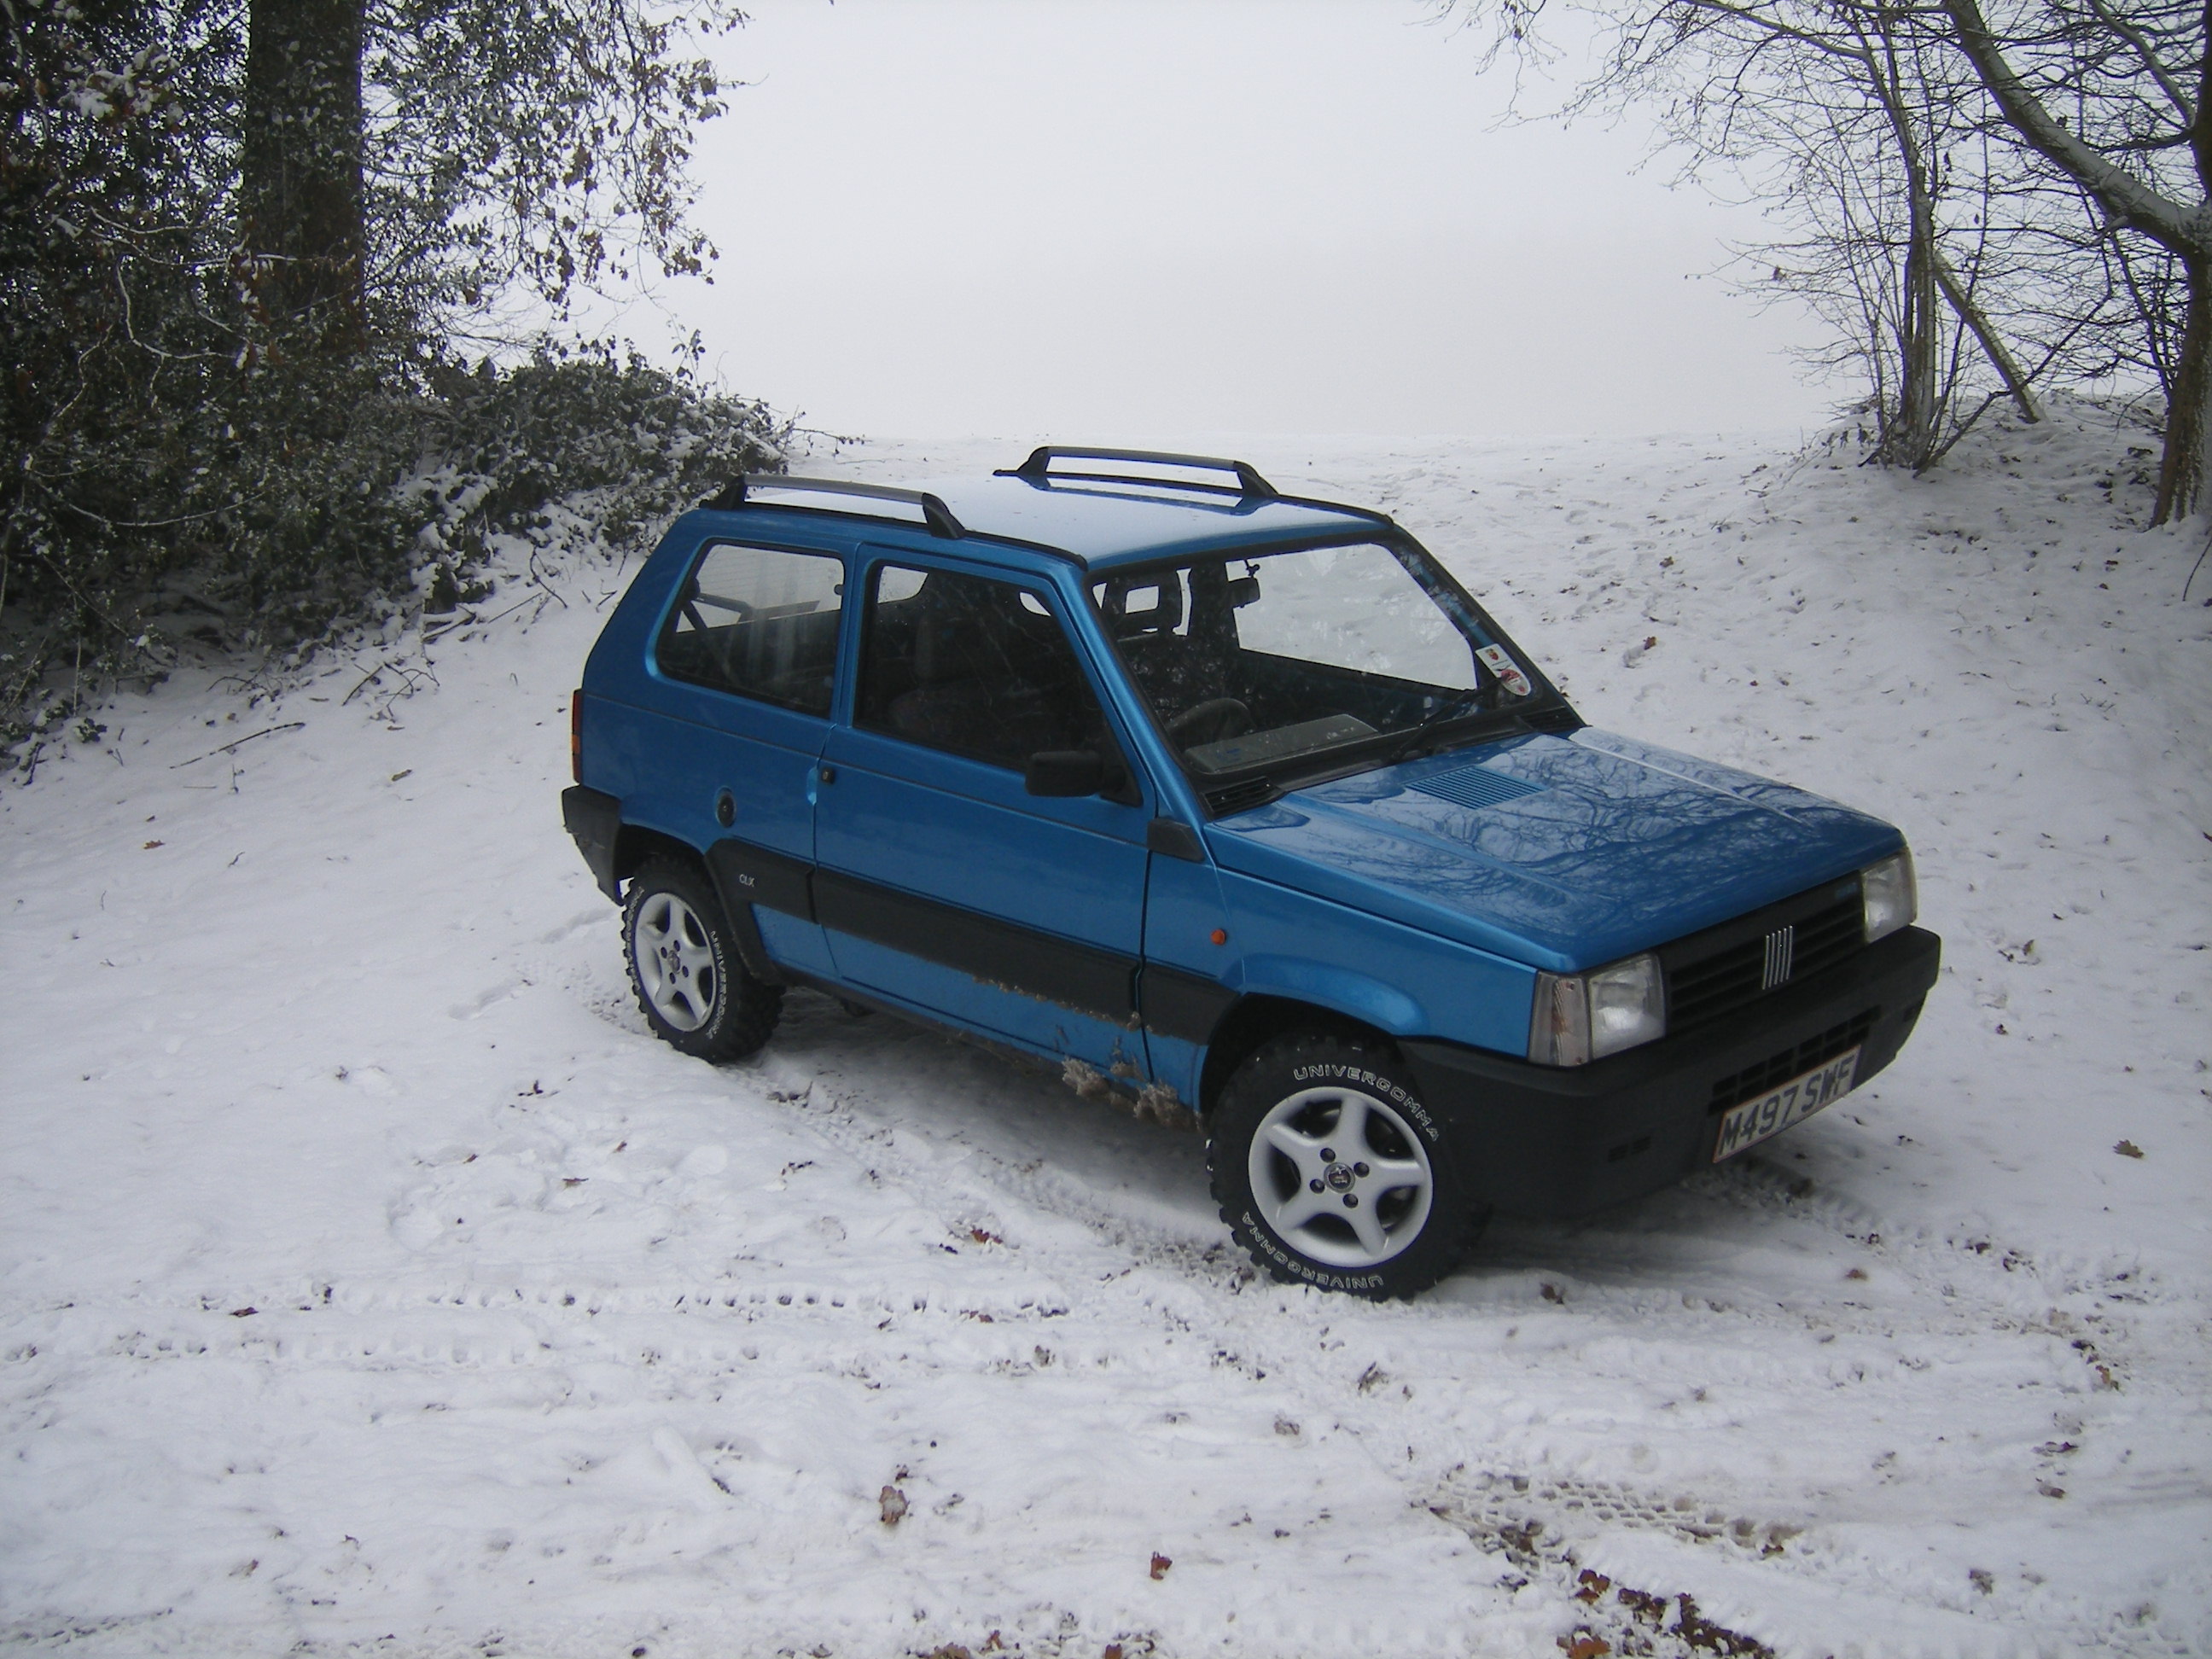 Panda in the snow, 2wd!